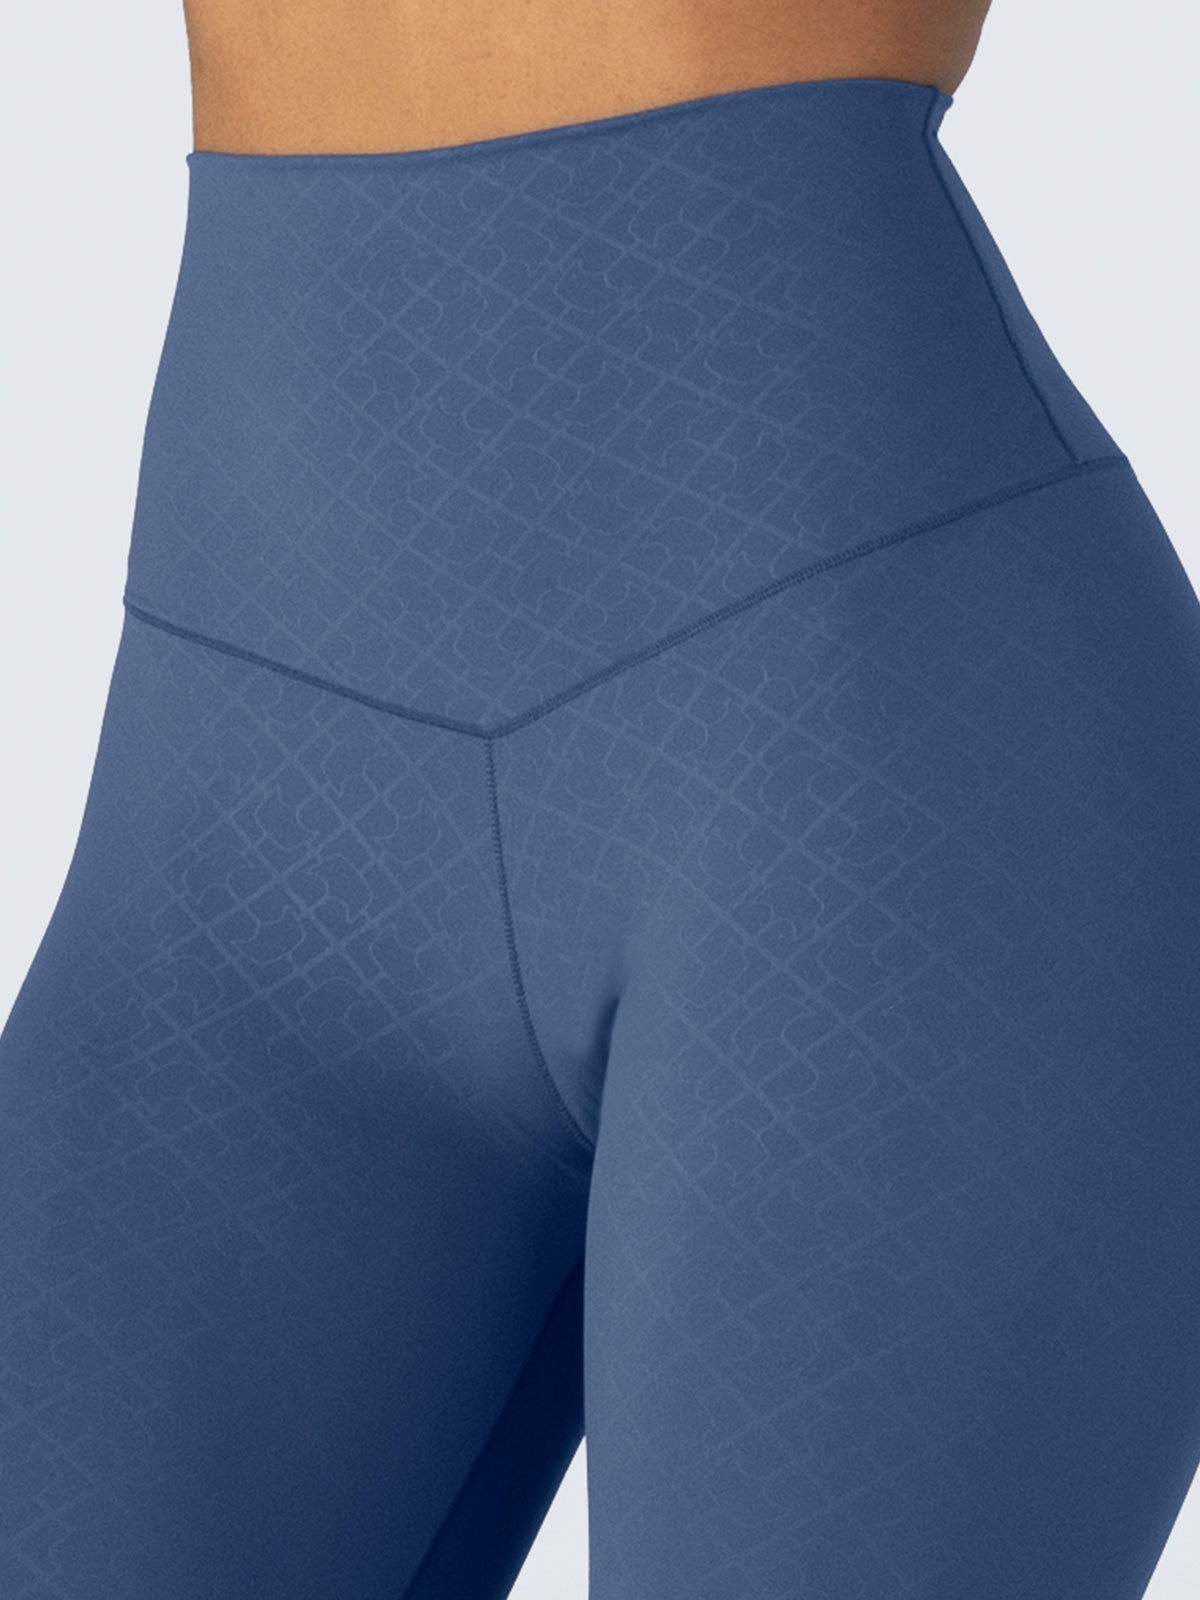 Shascullfites gym and shaping Navy Blue Sports Legging High